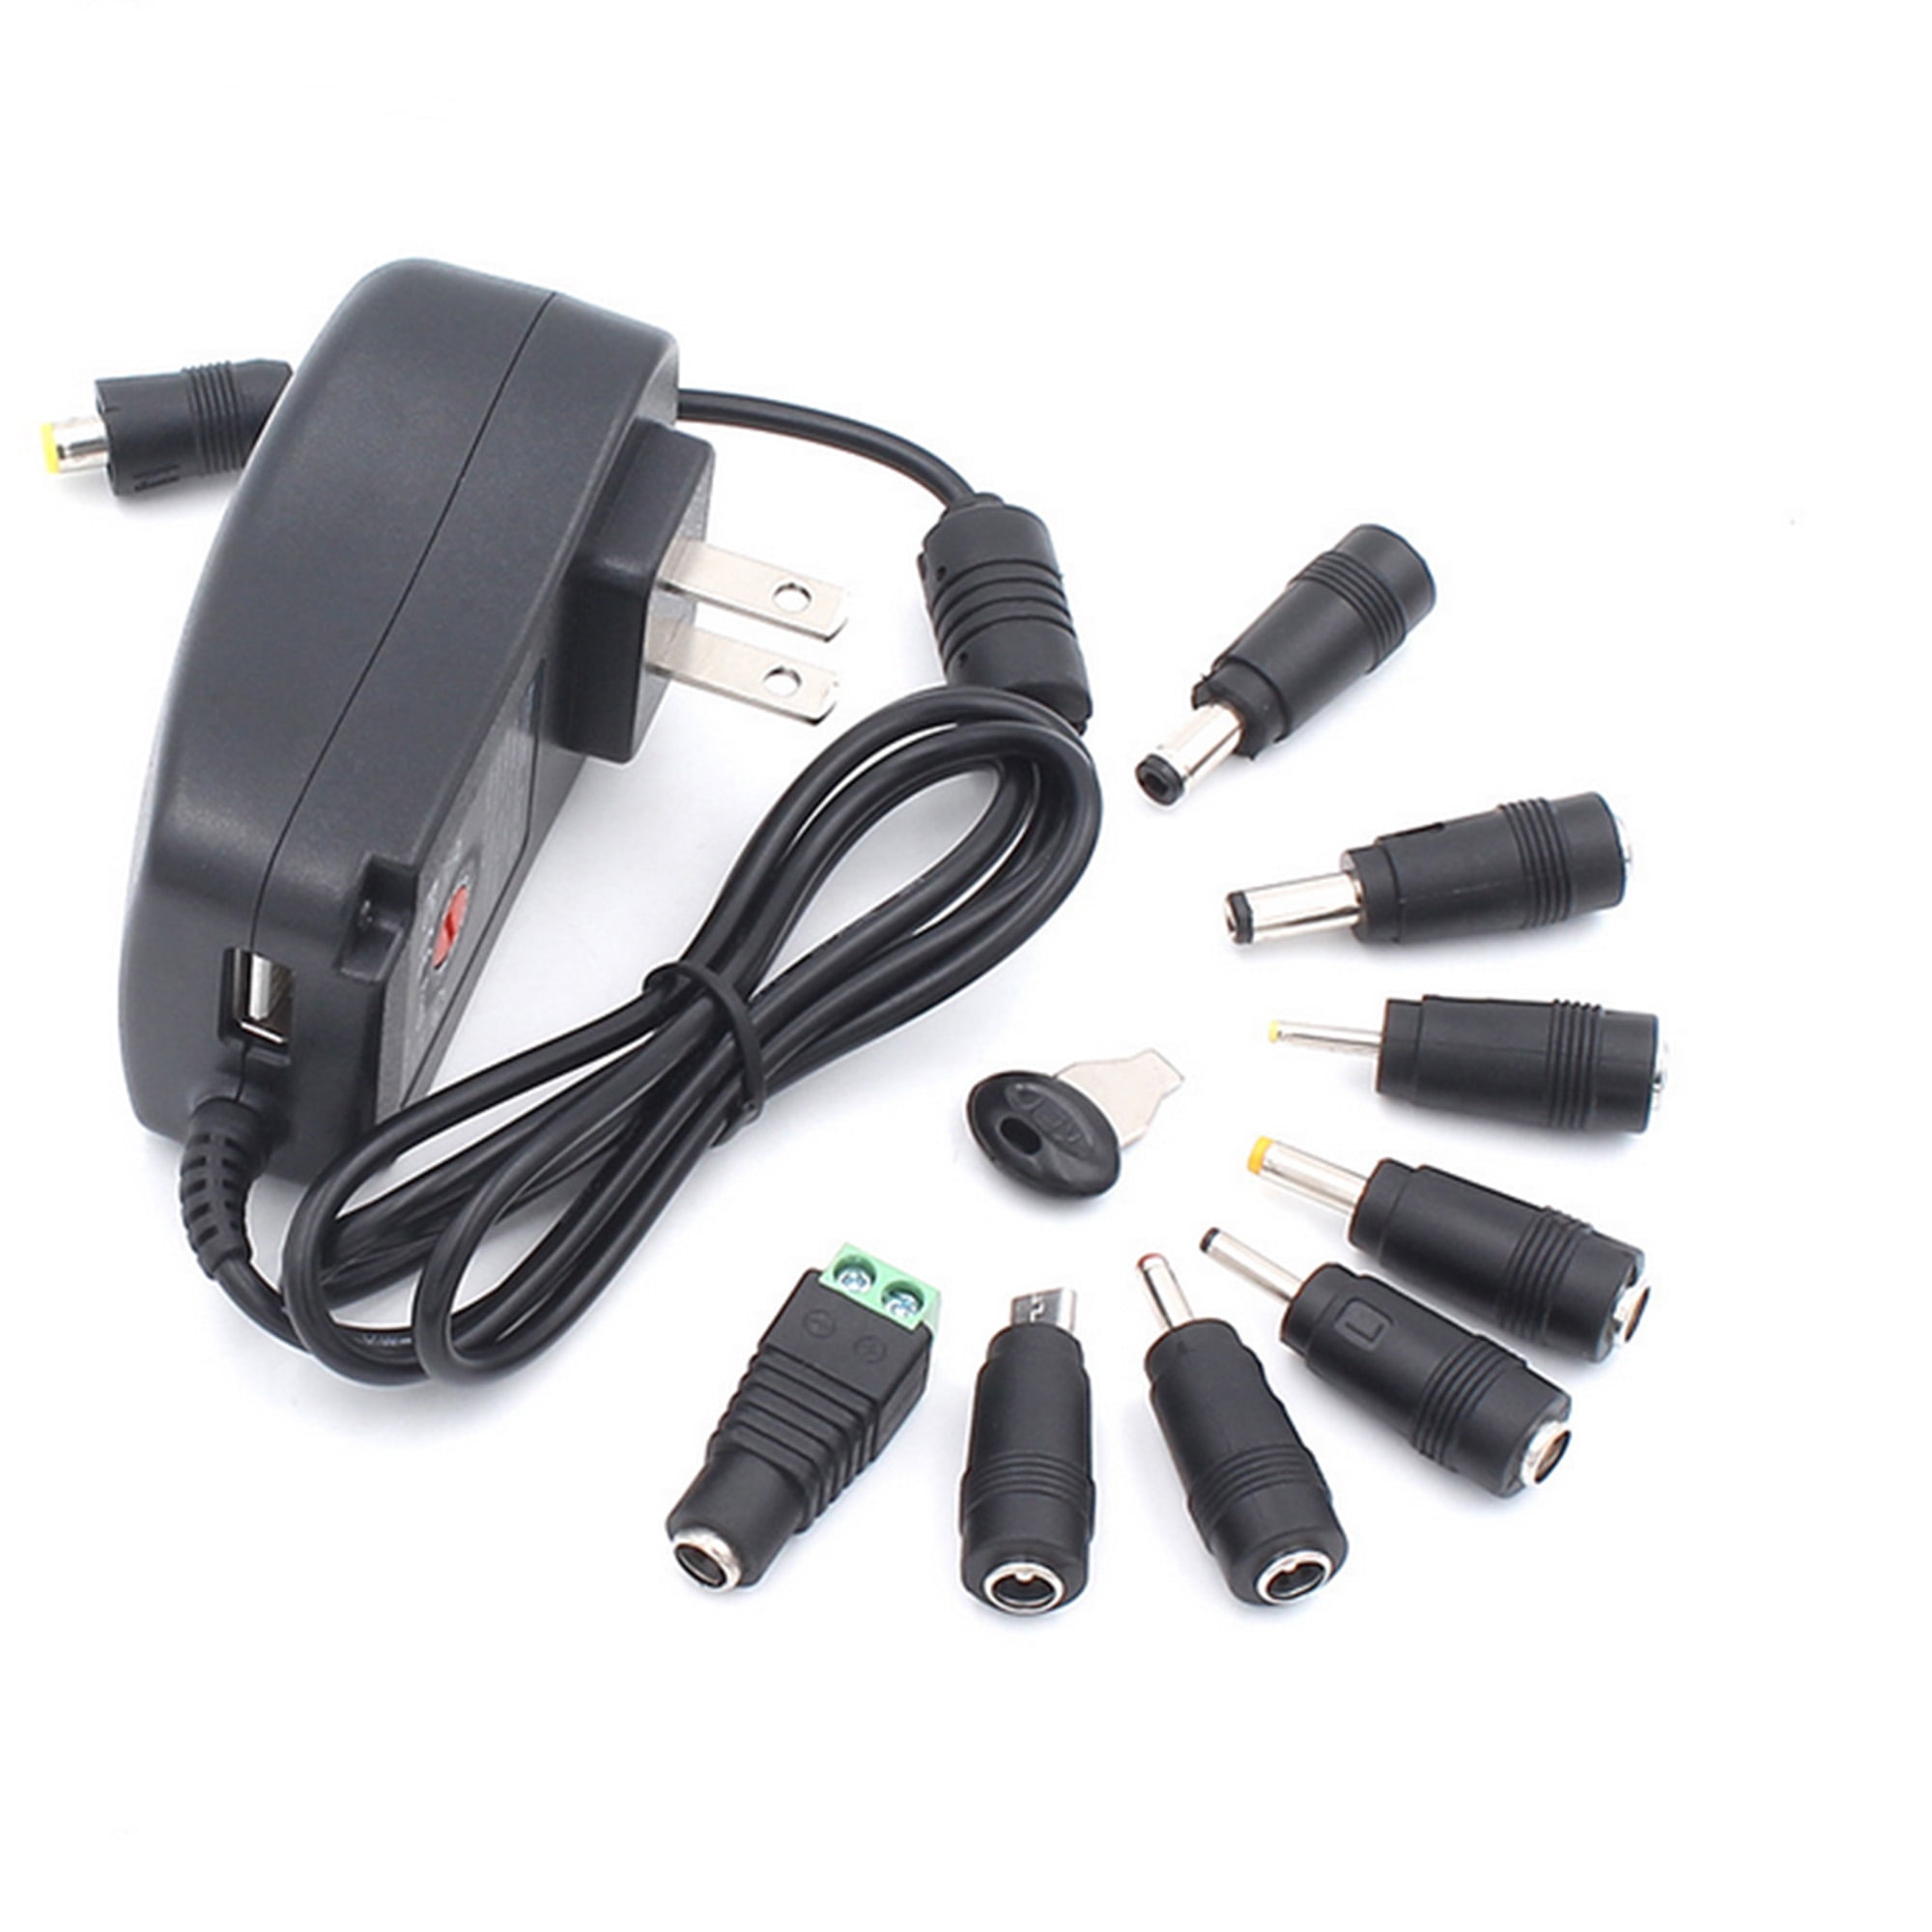 variable power supply,Universal multi voltage power adapter 30W 2000mA Universal 